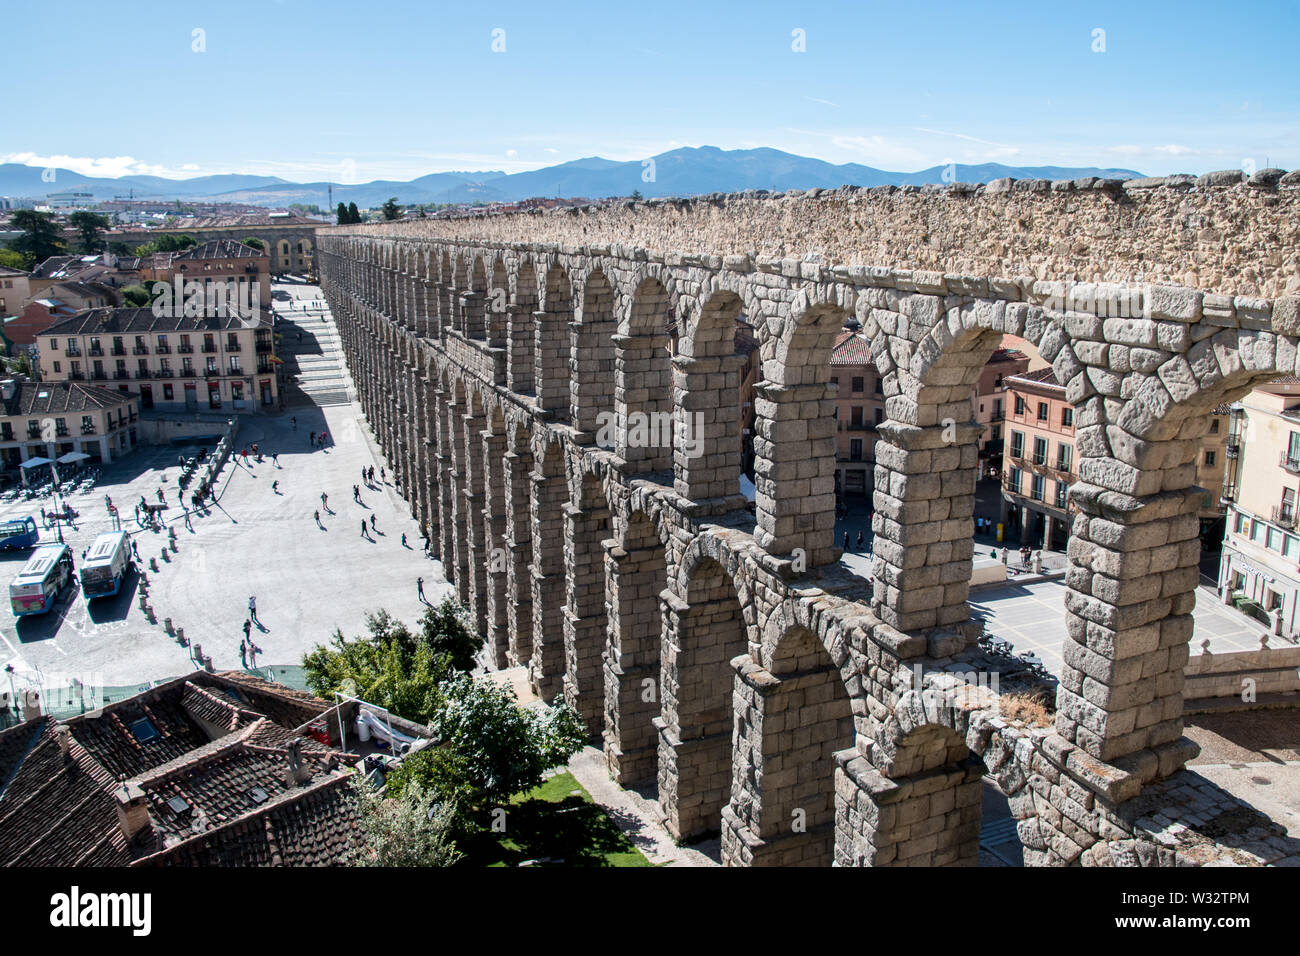 The Aqueduct of Segovia is a Roman aqueduct in Segovia, Spain. It is one of the best-preserved elevated Roman aqueducts and the symbol of Segovia. Stock Photo